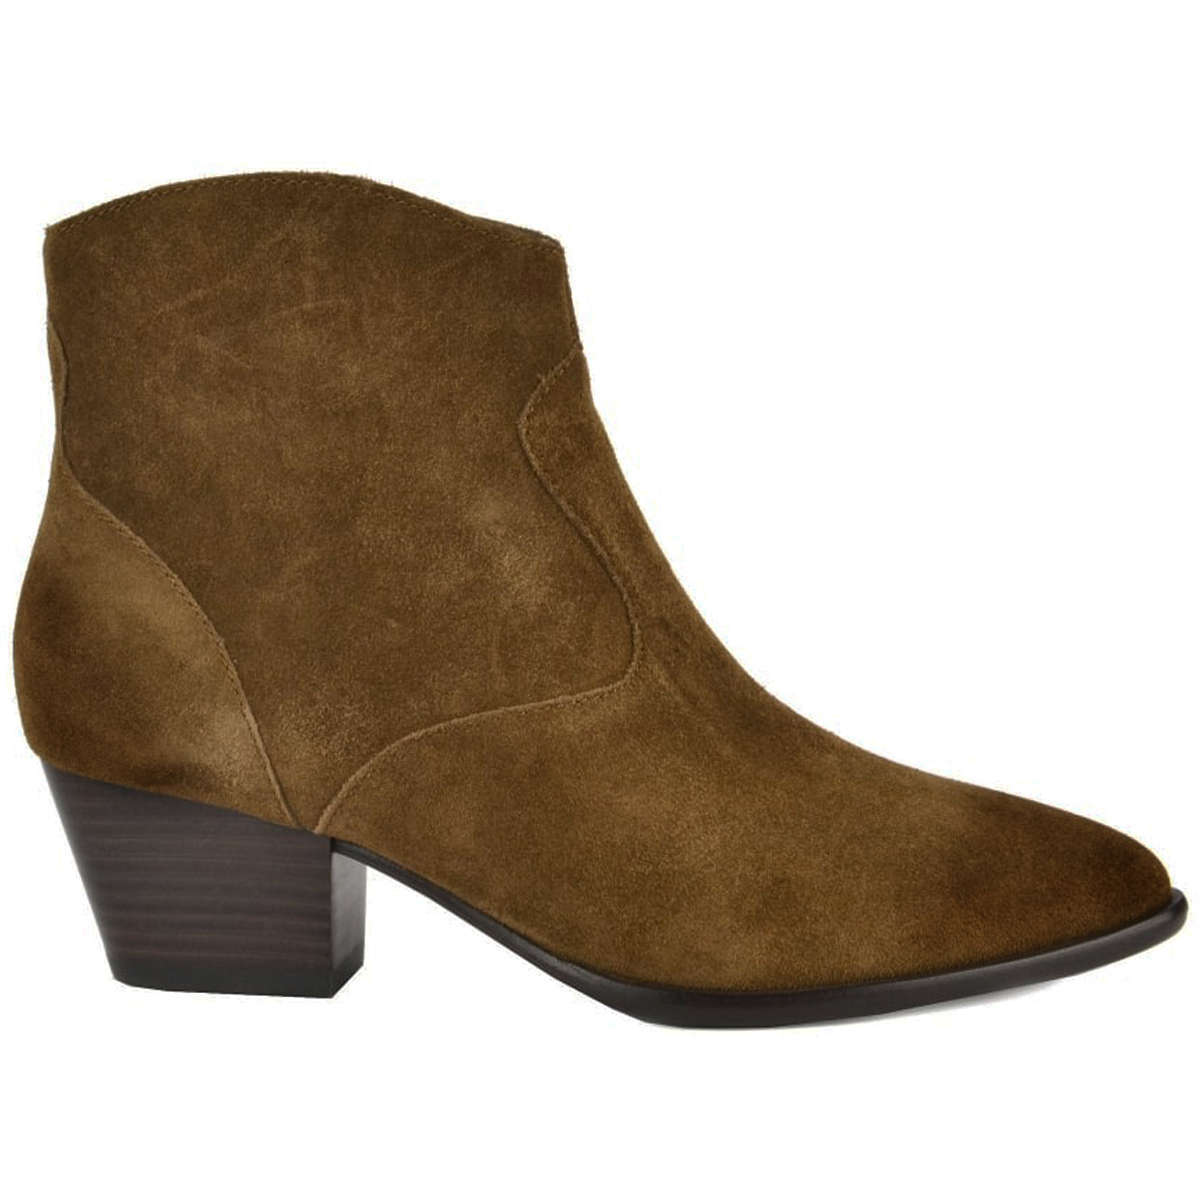 Ash Heidi Bis Suede Leather Women's Heeled Ankle Boots#color_russet